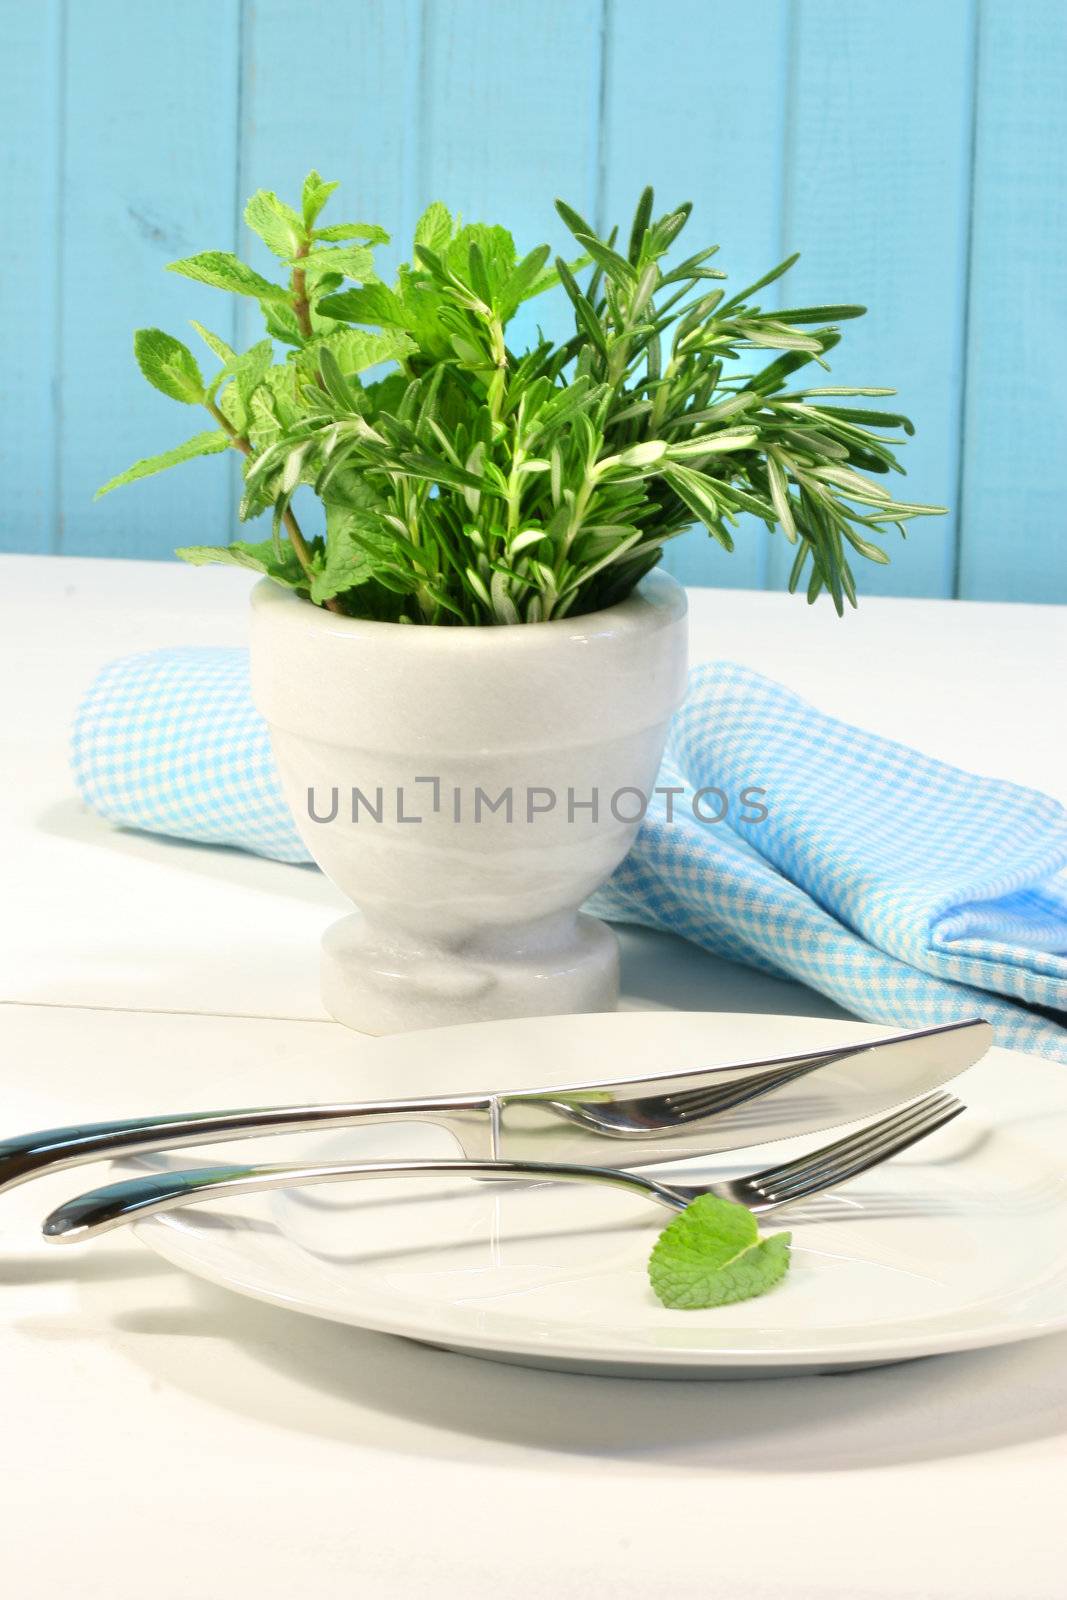 Fresh green herbs on a table in the kitchen